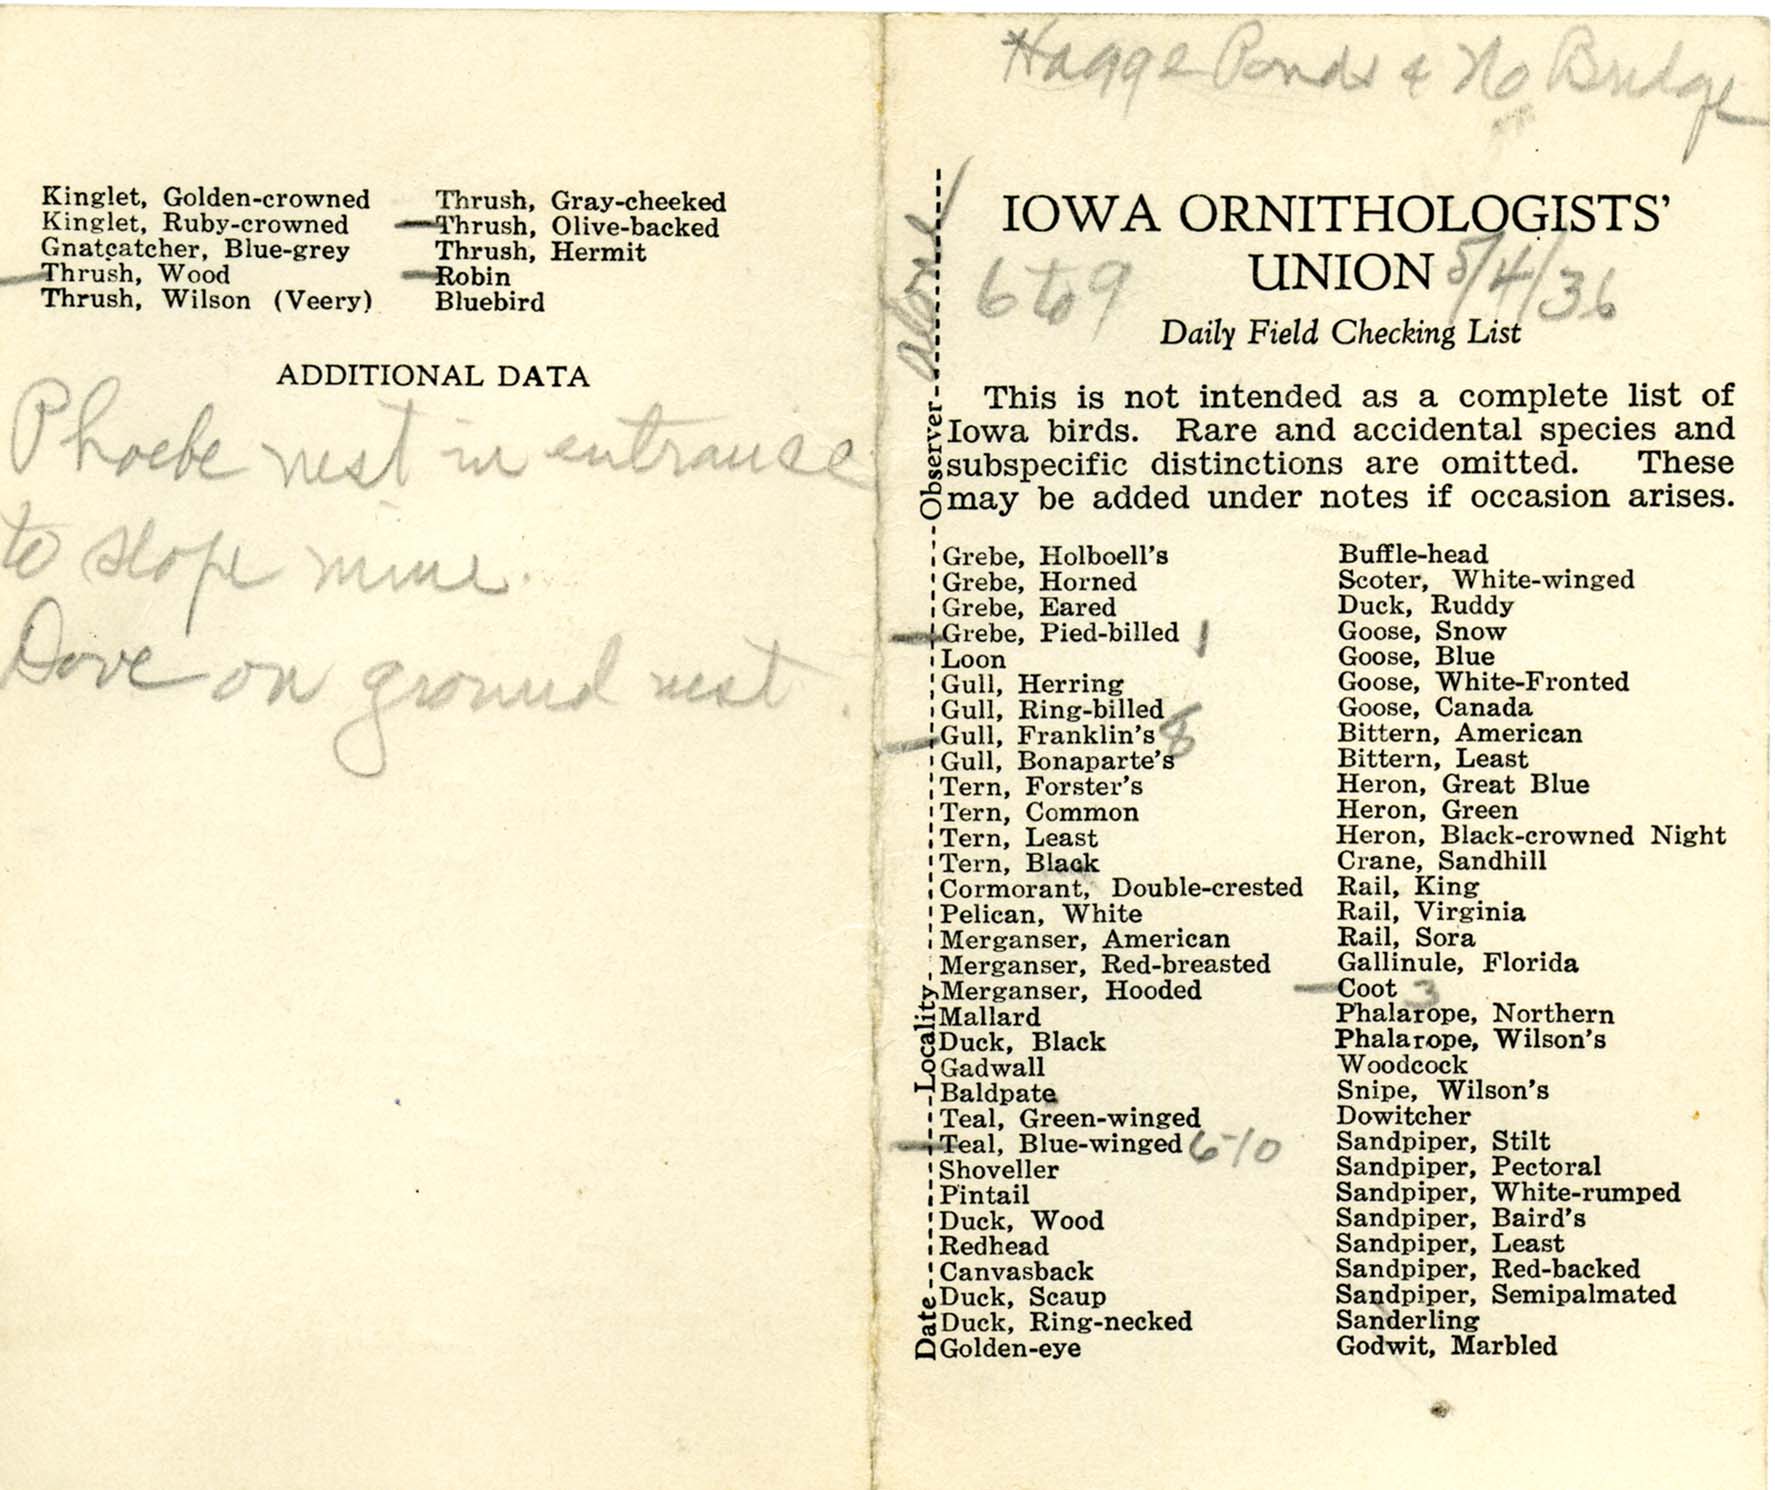 Daily field checking list by Walter Rosene, May 4, 1936